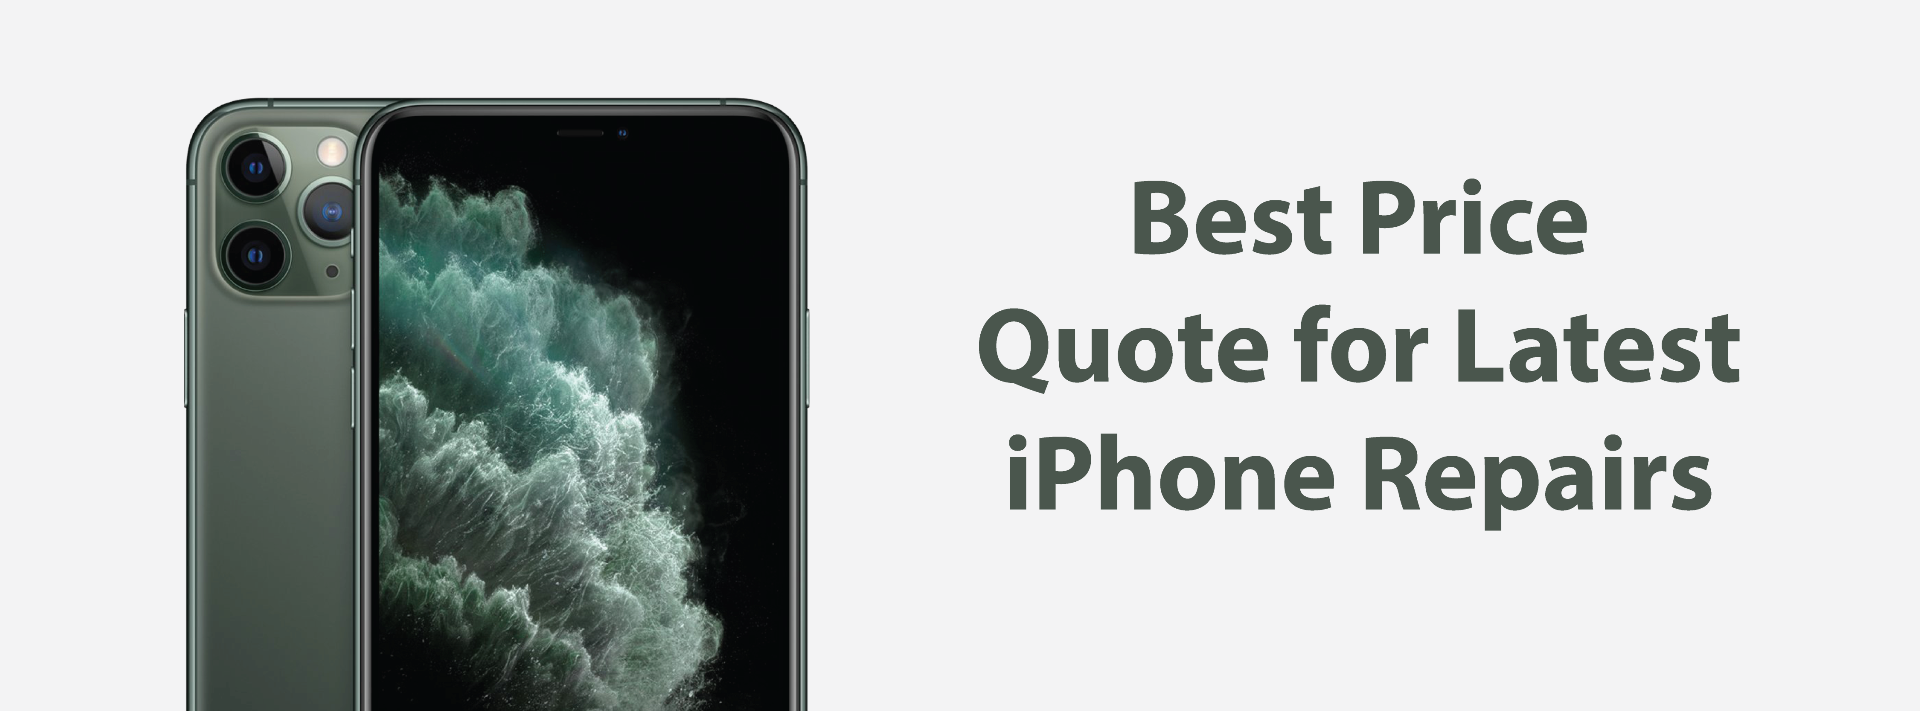 Best Price iPhone 11 Pro Max Repairs in Canberra and Queanbeyan